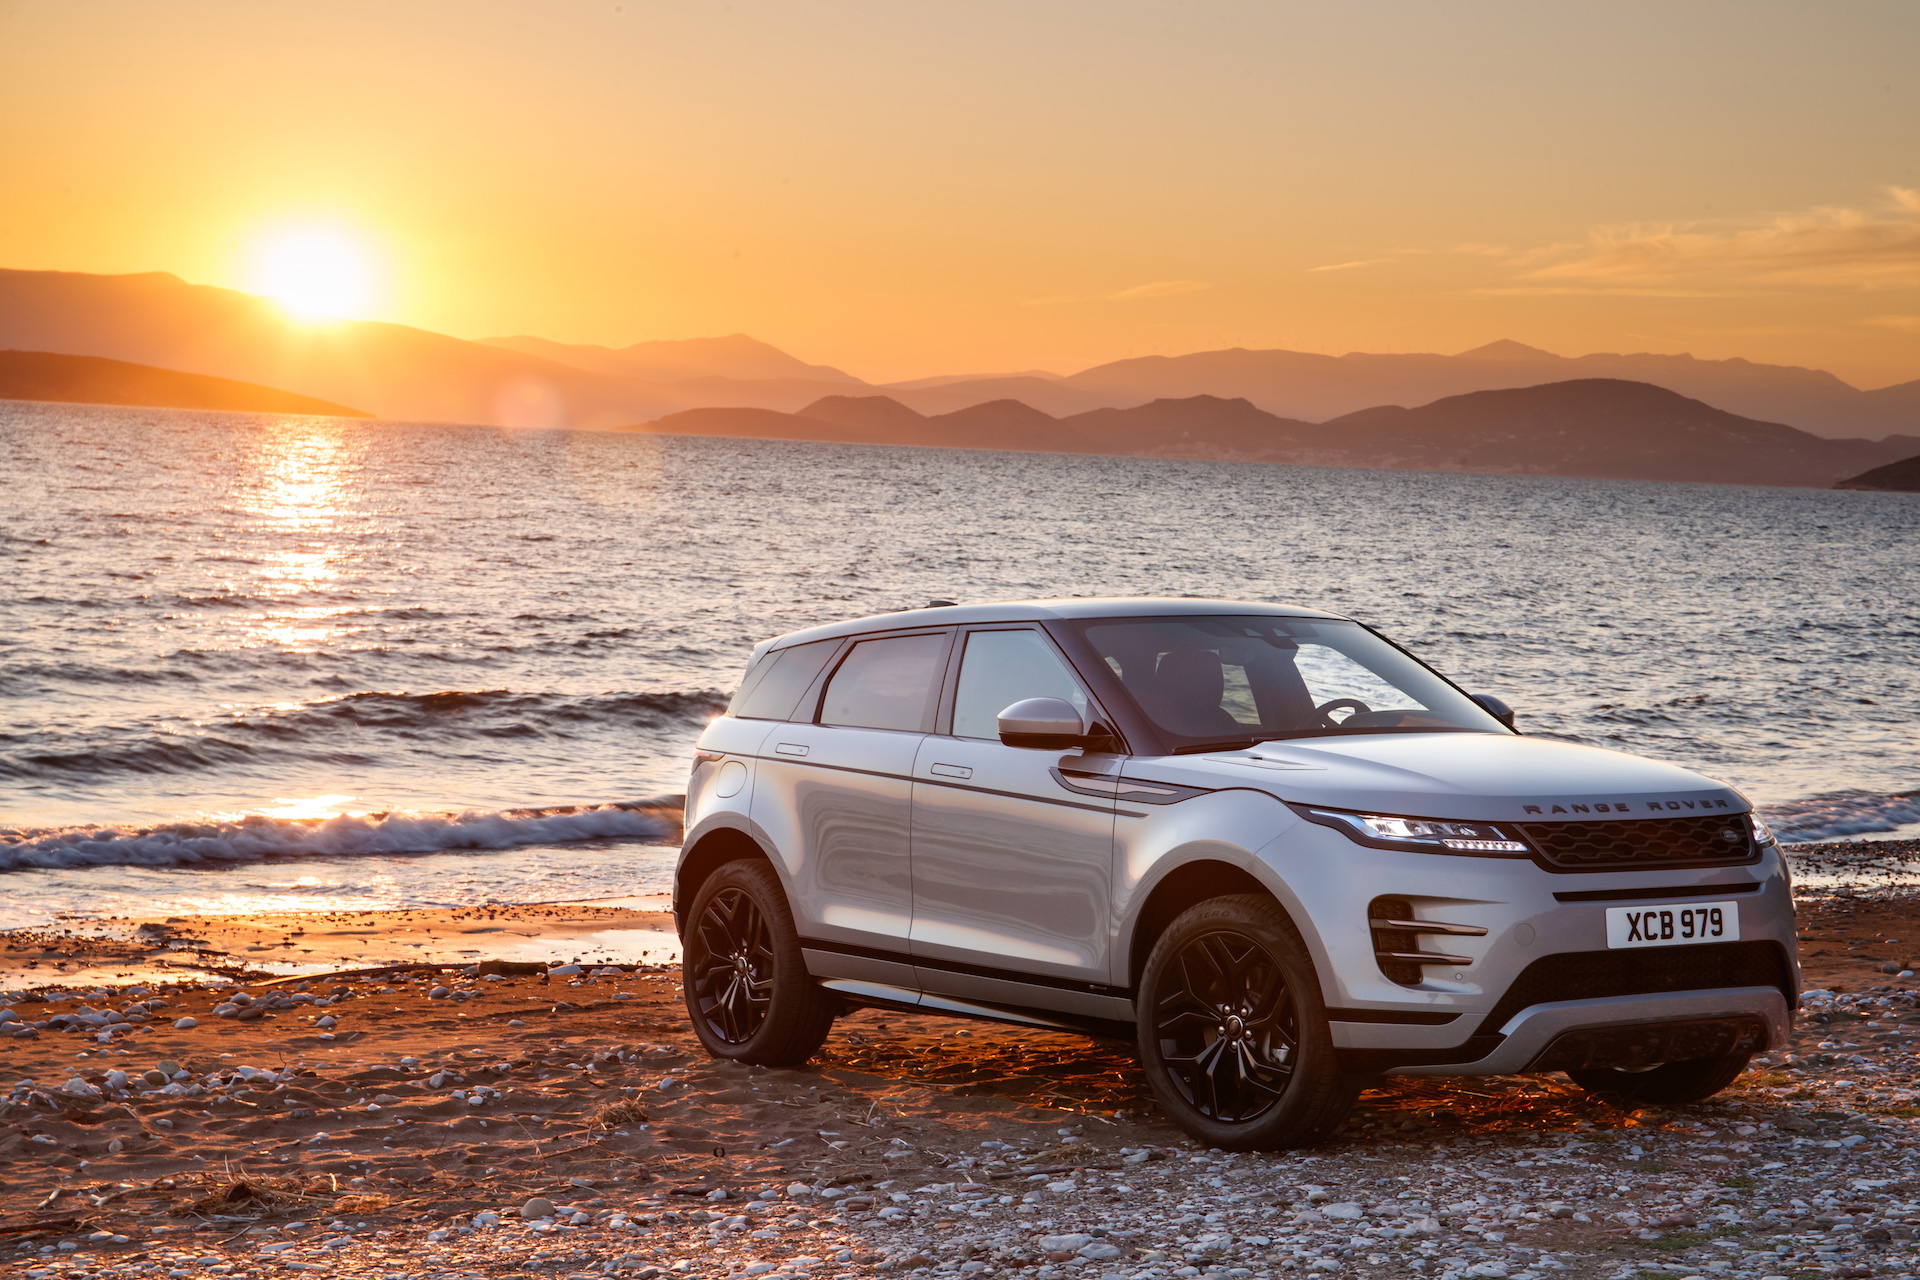 Range Rover Evoque 2020 Base Model  : The New 2020 Range Rover Evoque Manages To Grow Without Growing, And To Refine A Sleek Look Without Losing The Plot.